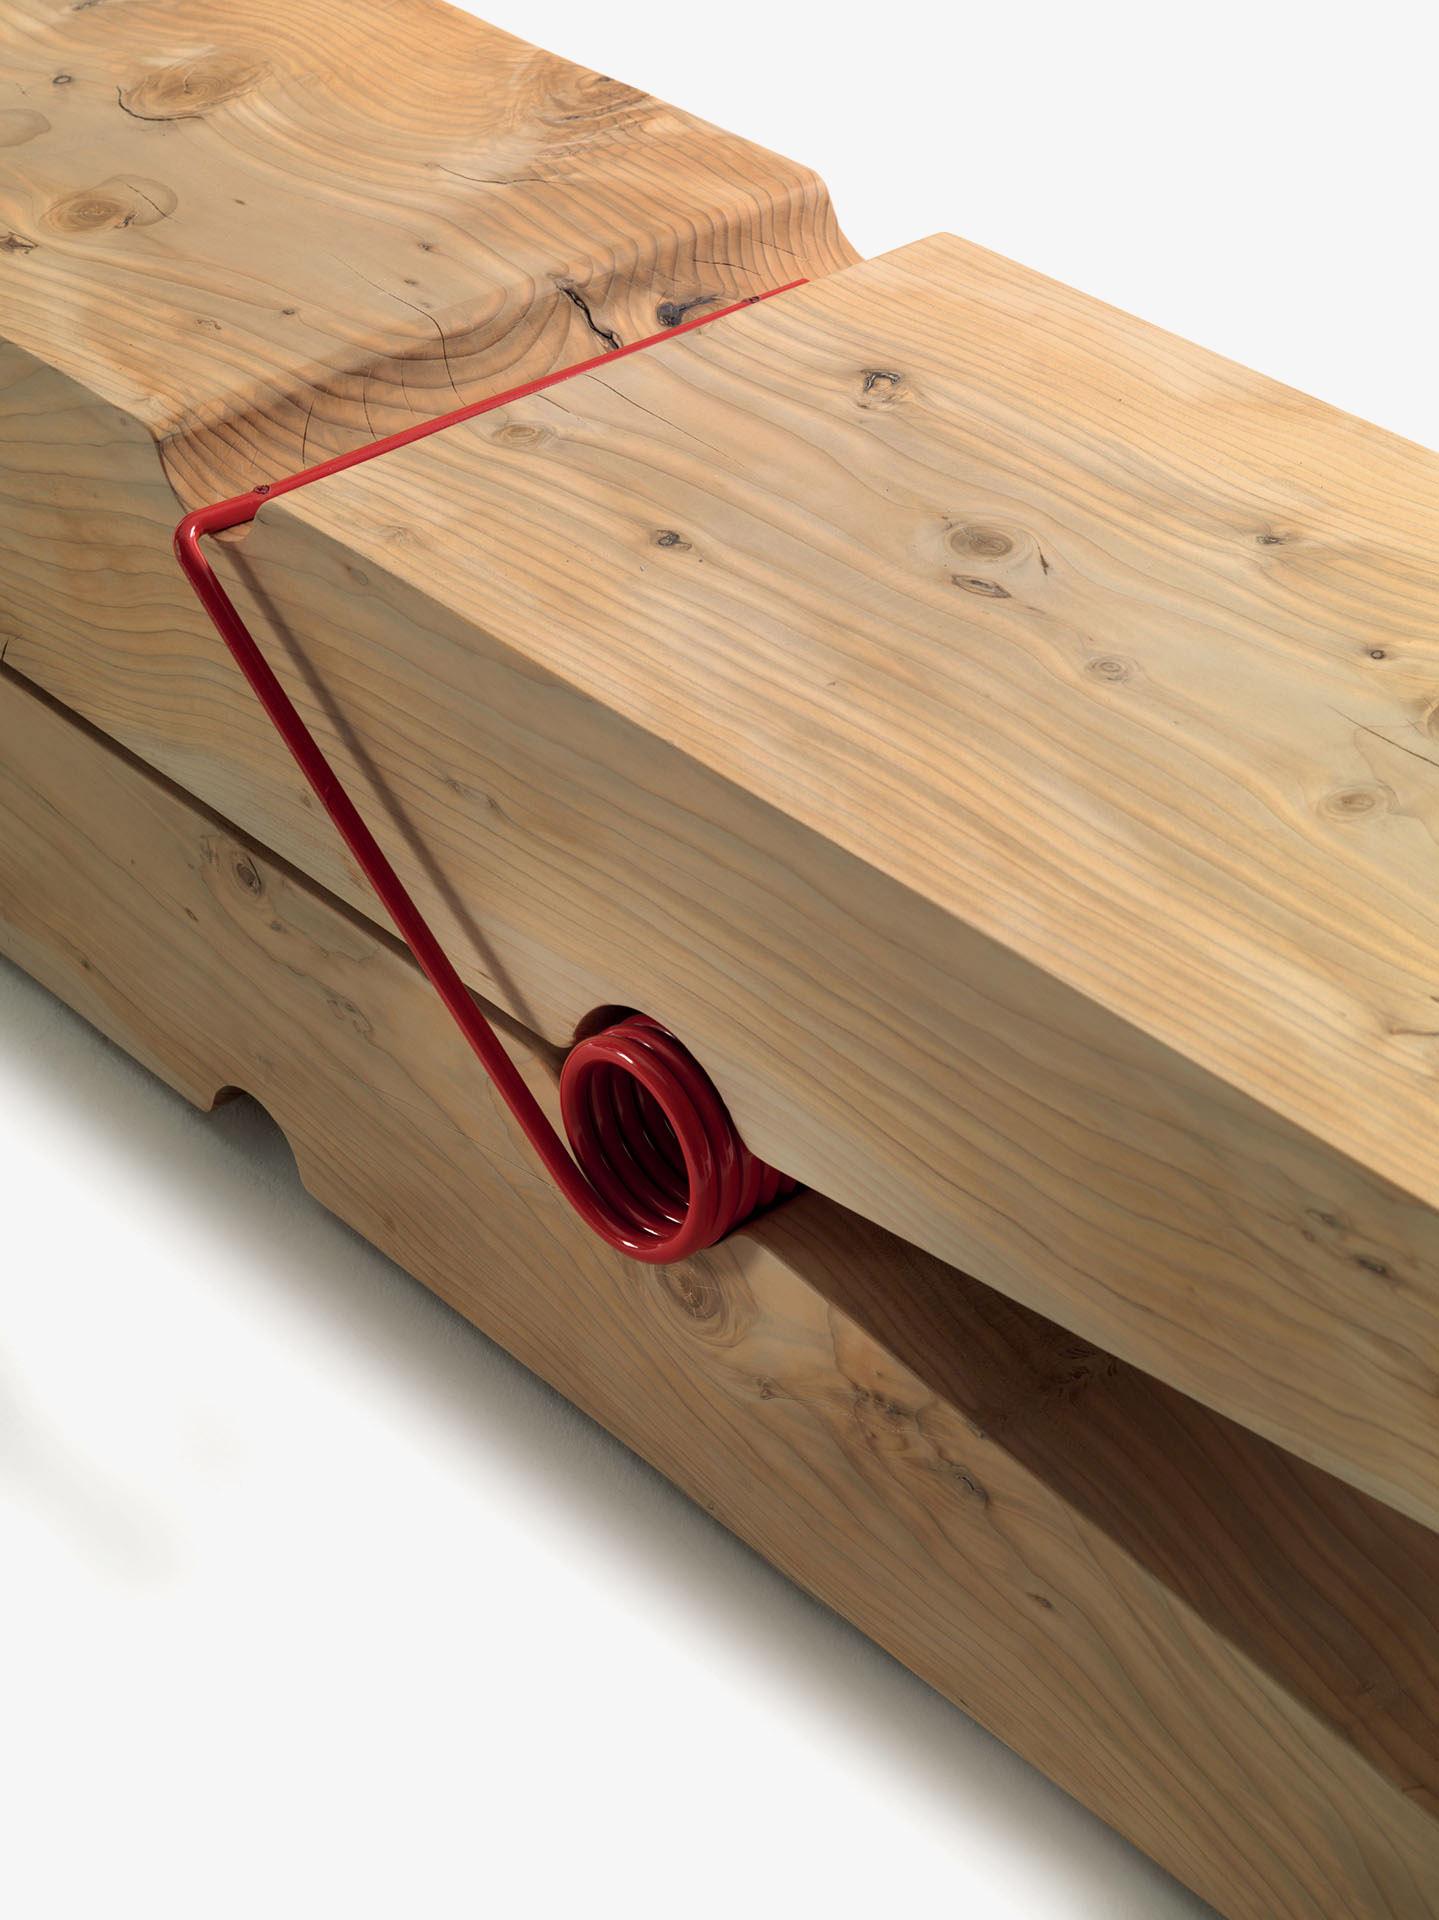 Bench made of solid scented cedar worked from single blocks. It features a sculptured design that experiments with the Classic Pop Art off-scale approach.